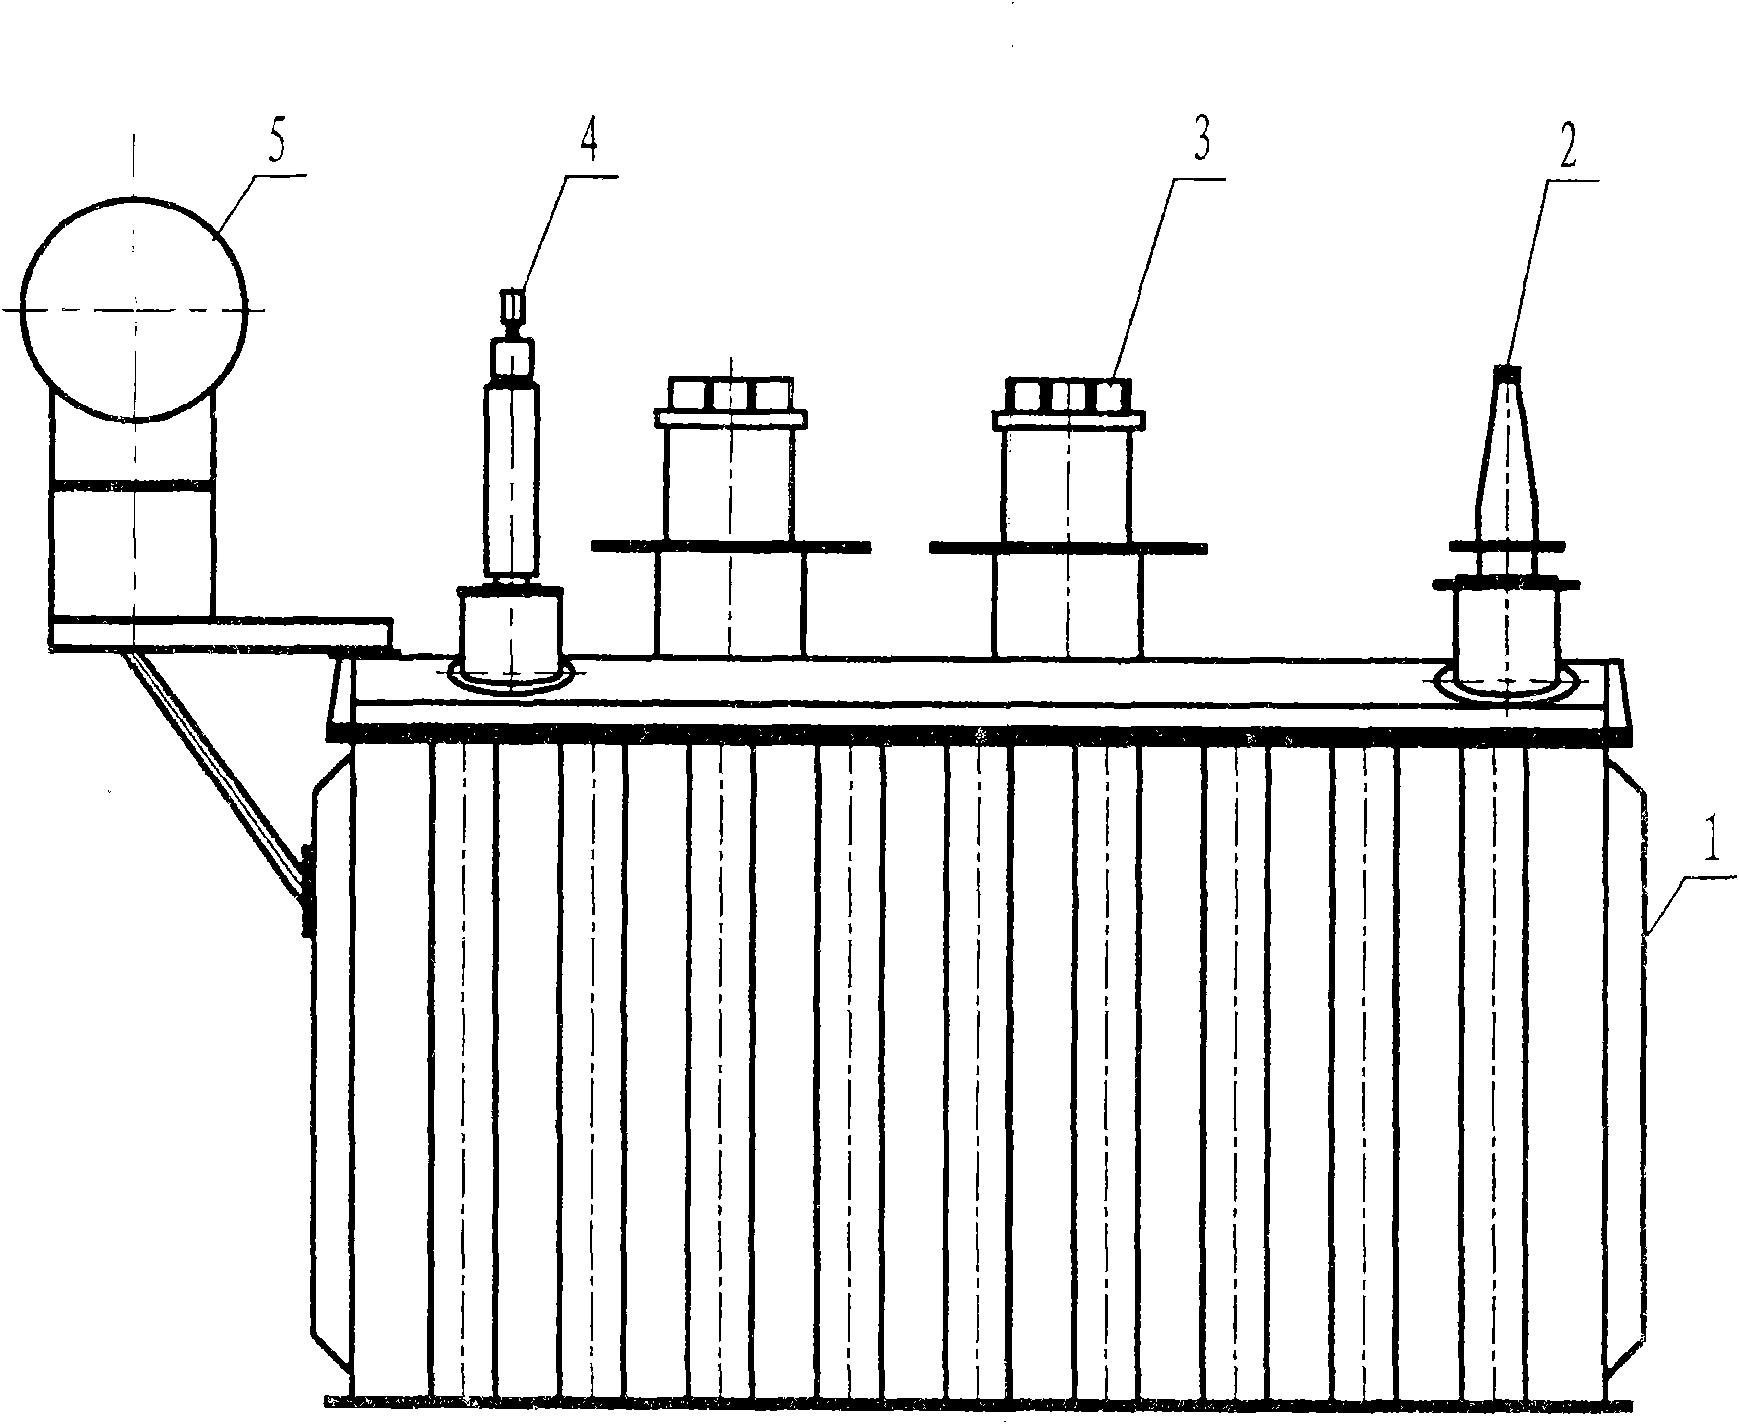 Single-phase ultra-high-capacity nuclear power station transformer